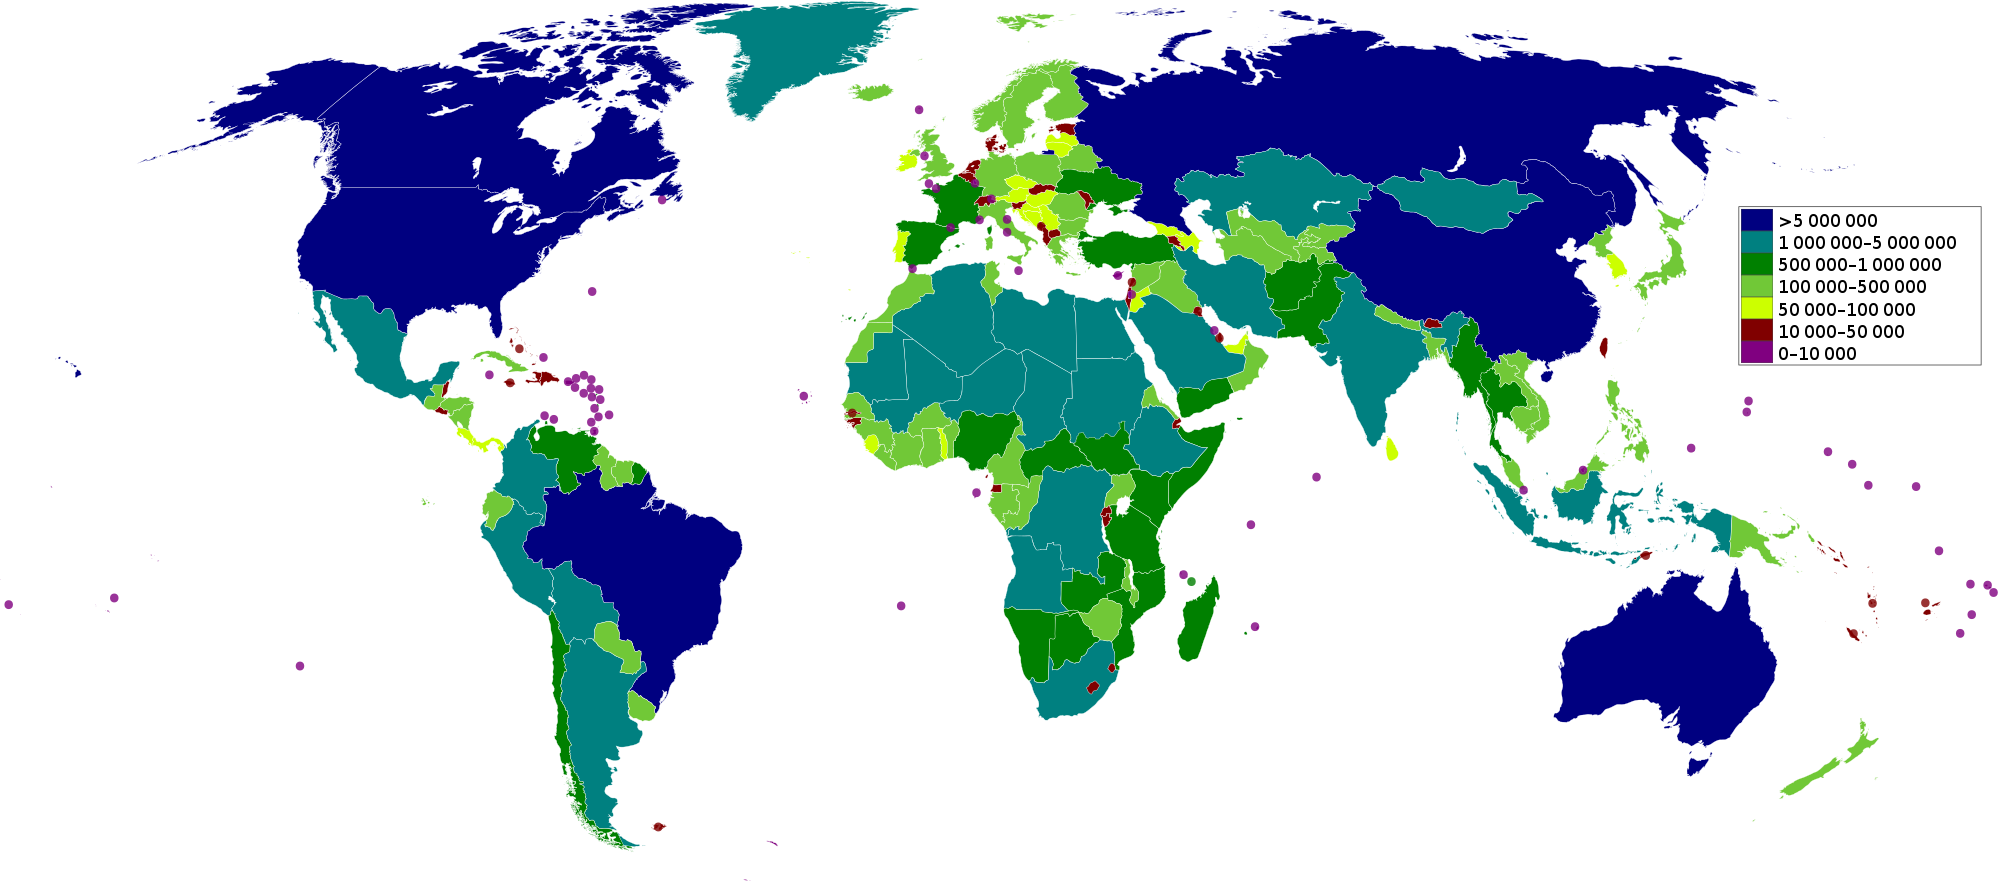 World map, except Antarctica, colour-coded by areas of countries in square kilometres